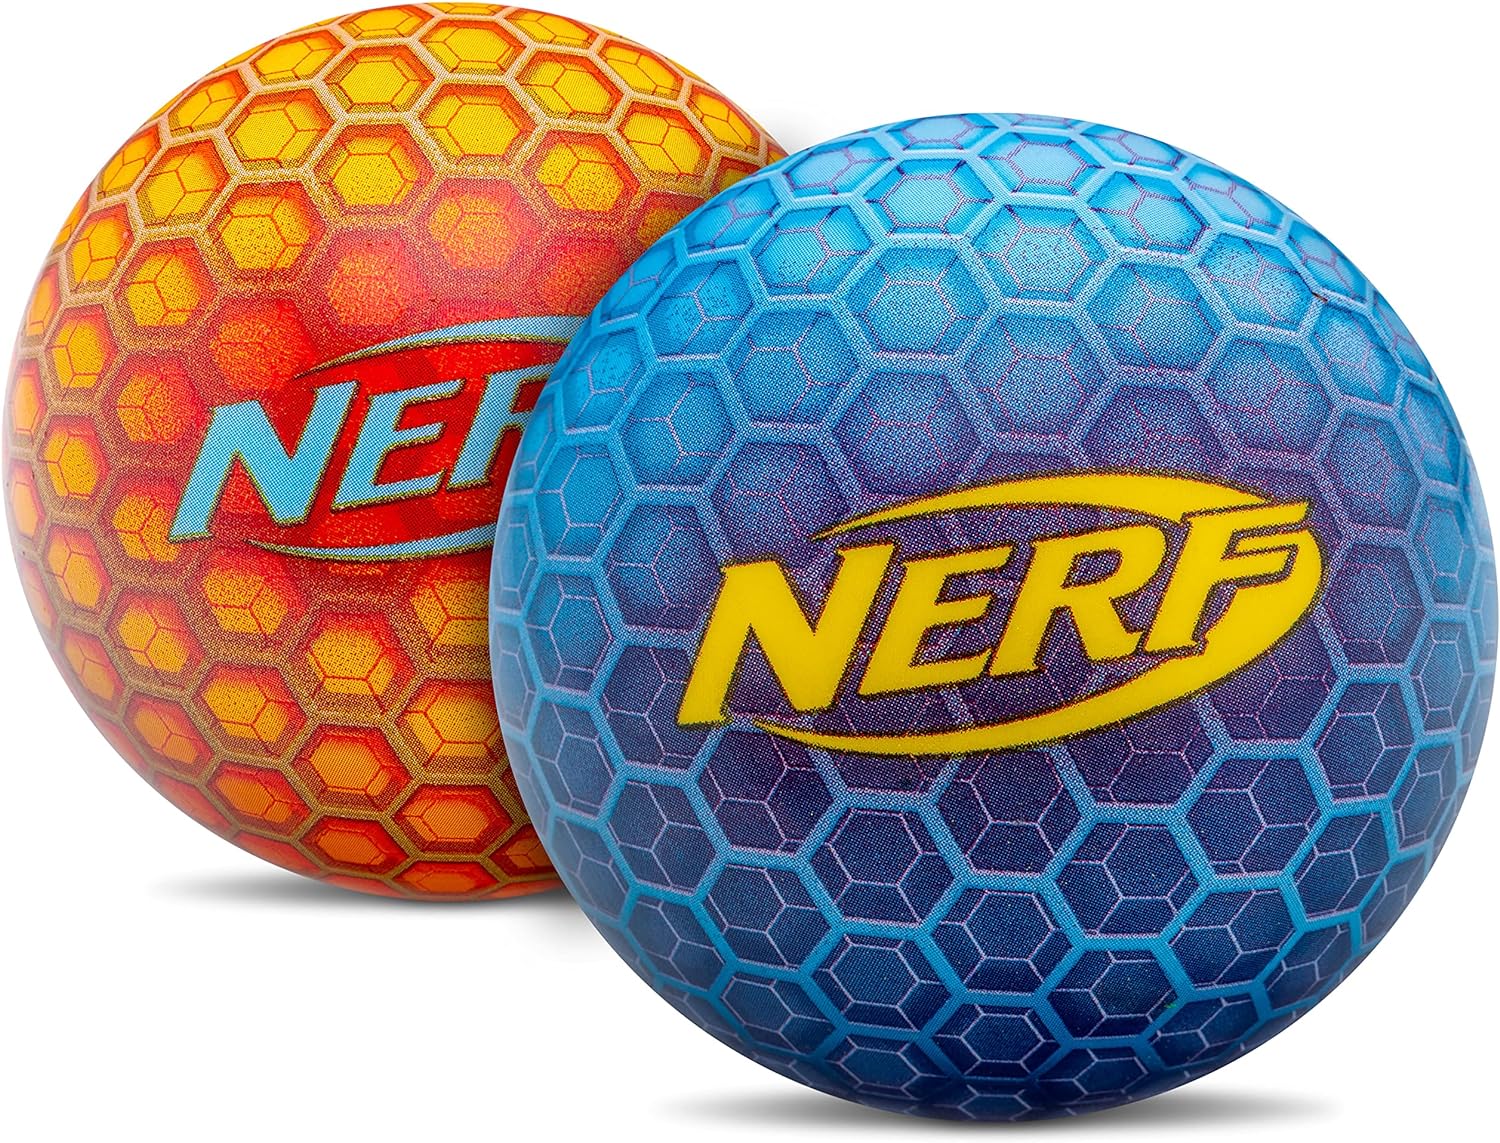 NERF Super High Bounce Ball - 2 Balls Included - Durable and Lightweight for Indoor and Outdoor Fun